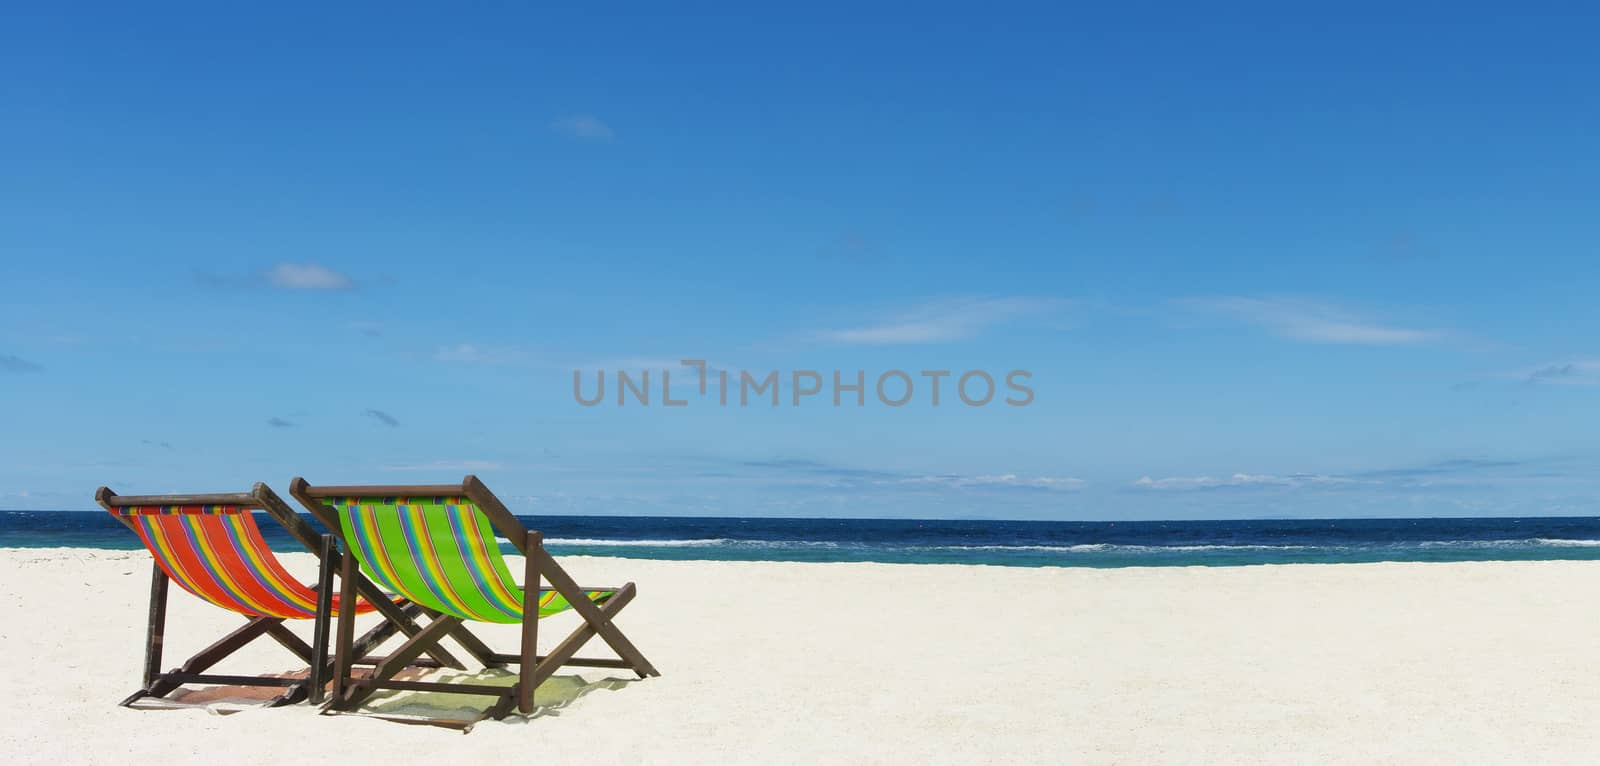 Beach chair on sand beside nice sea, Summer time concept by pixbox77